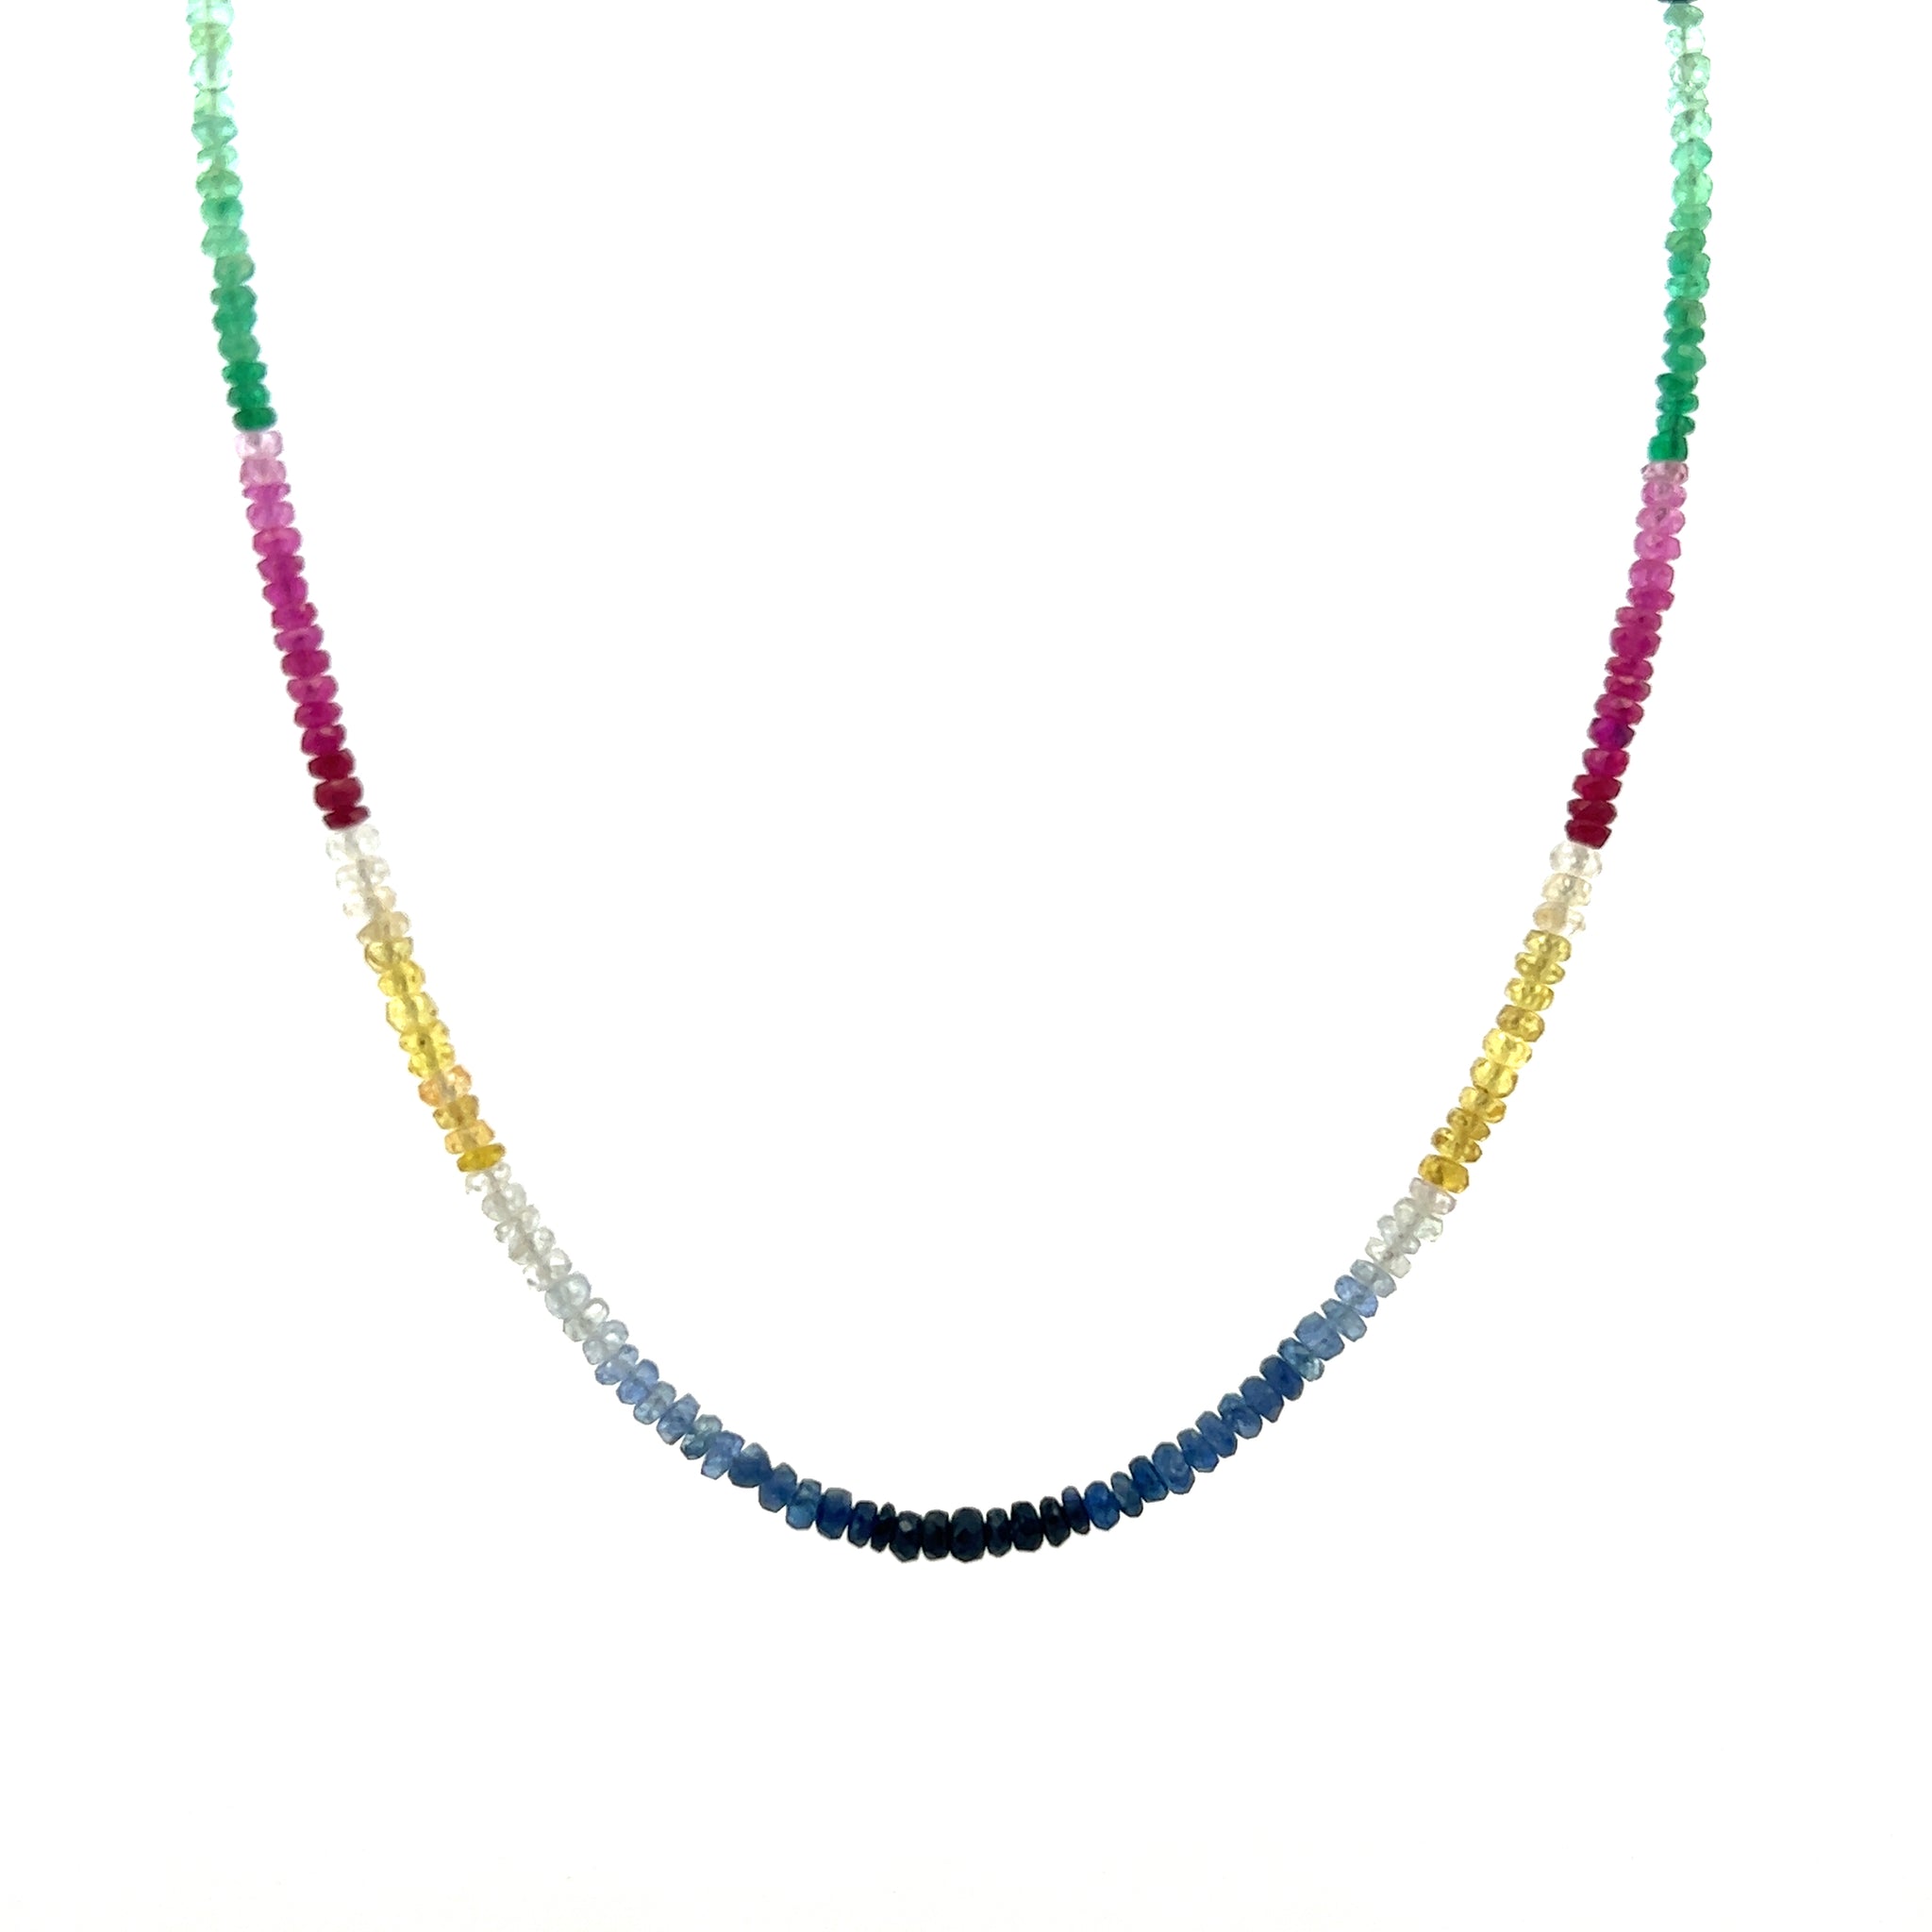 Natural Handmade Necklace Multi Sapphire Gemstone Rainbow Faceted Beaded Jewelry